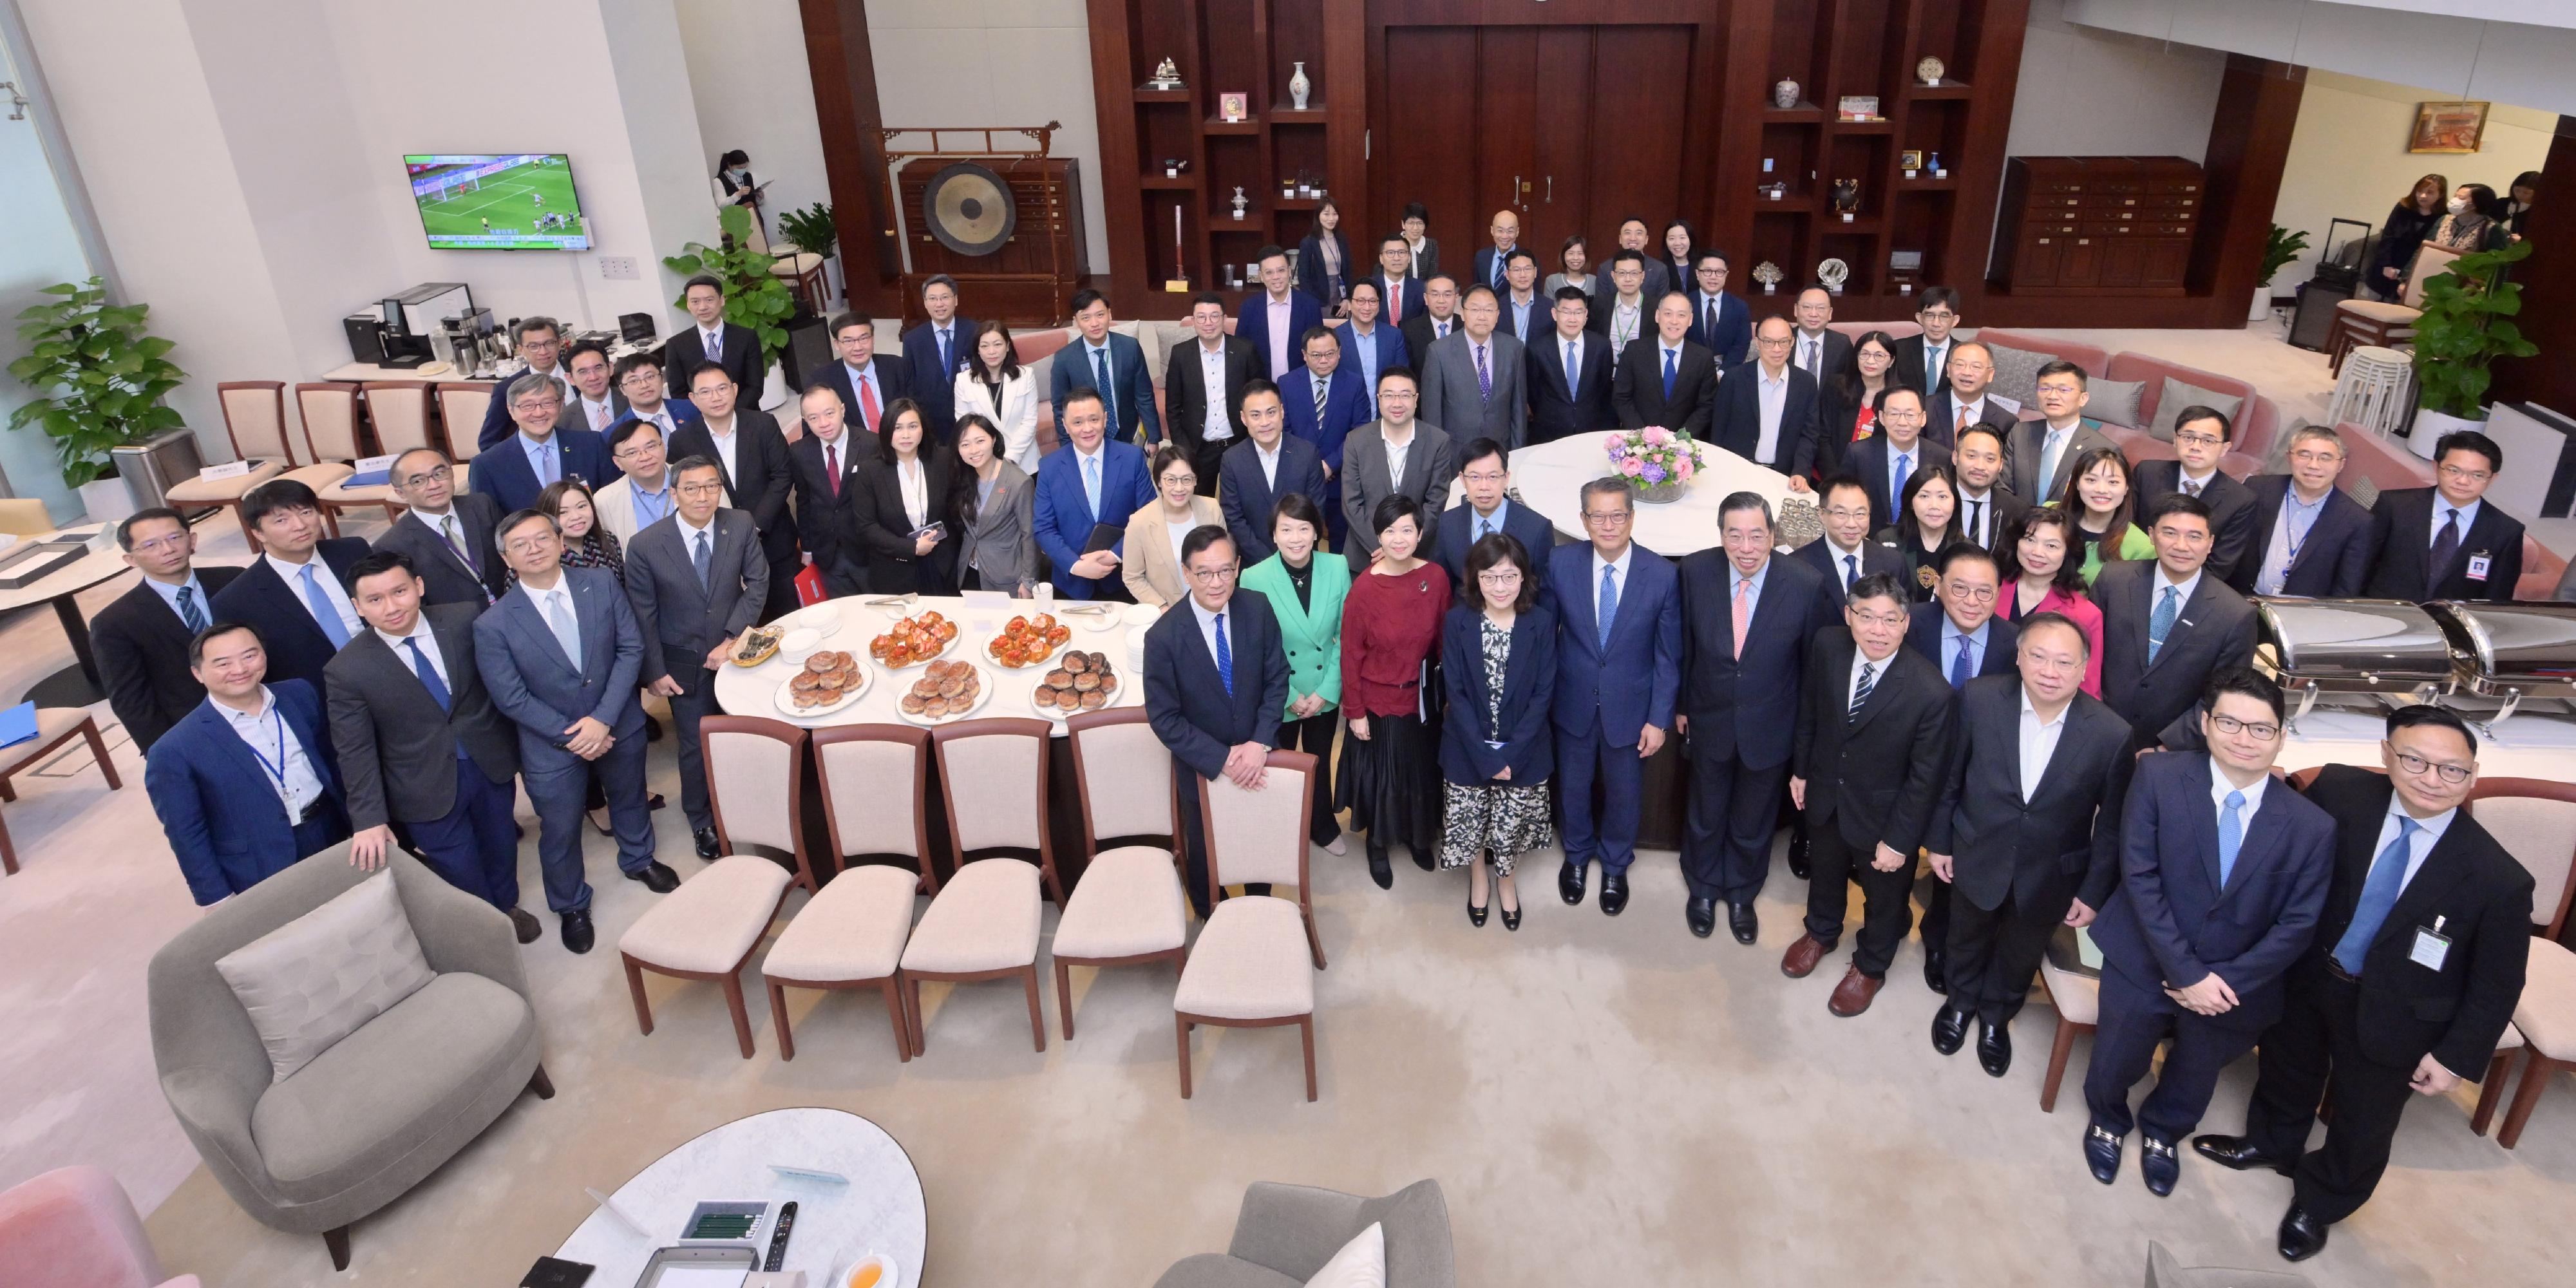 The Financial Secretary, Mr Paul Chan, attended the Ante Chamber exchange session at the Legislative Council (LegCo) today (April 26). Photo shows Mr Chan (first row, sixth right); the President of the LegCo, Mr Andrew Leung (first row, fifth right); the Secretary for Financial Services and the Treasury, Mr Christopher Hui (fourth row, sixth right); the Secretary for Transport and Logistics, Mr Lam Sai-hung (first row, fourth right); the Secretary for Development, Ms Bernadette Linn (first row, seventh right); the Secretary for Housing, Ms Winnie Ho (first row, eighth right); the Acting Secretary for Innovation, Technology and Industry, Ms Lillian Cheong (third row, fourth right), with LegCo Members before the meeting.